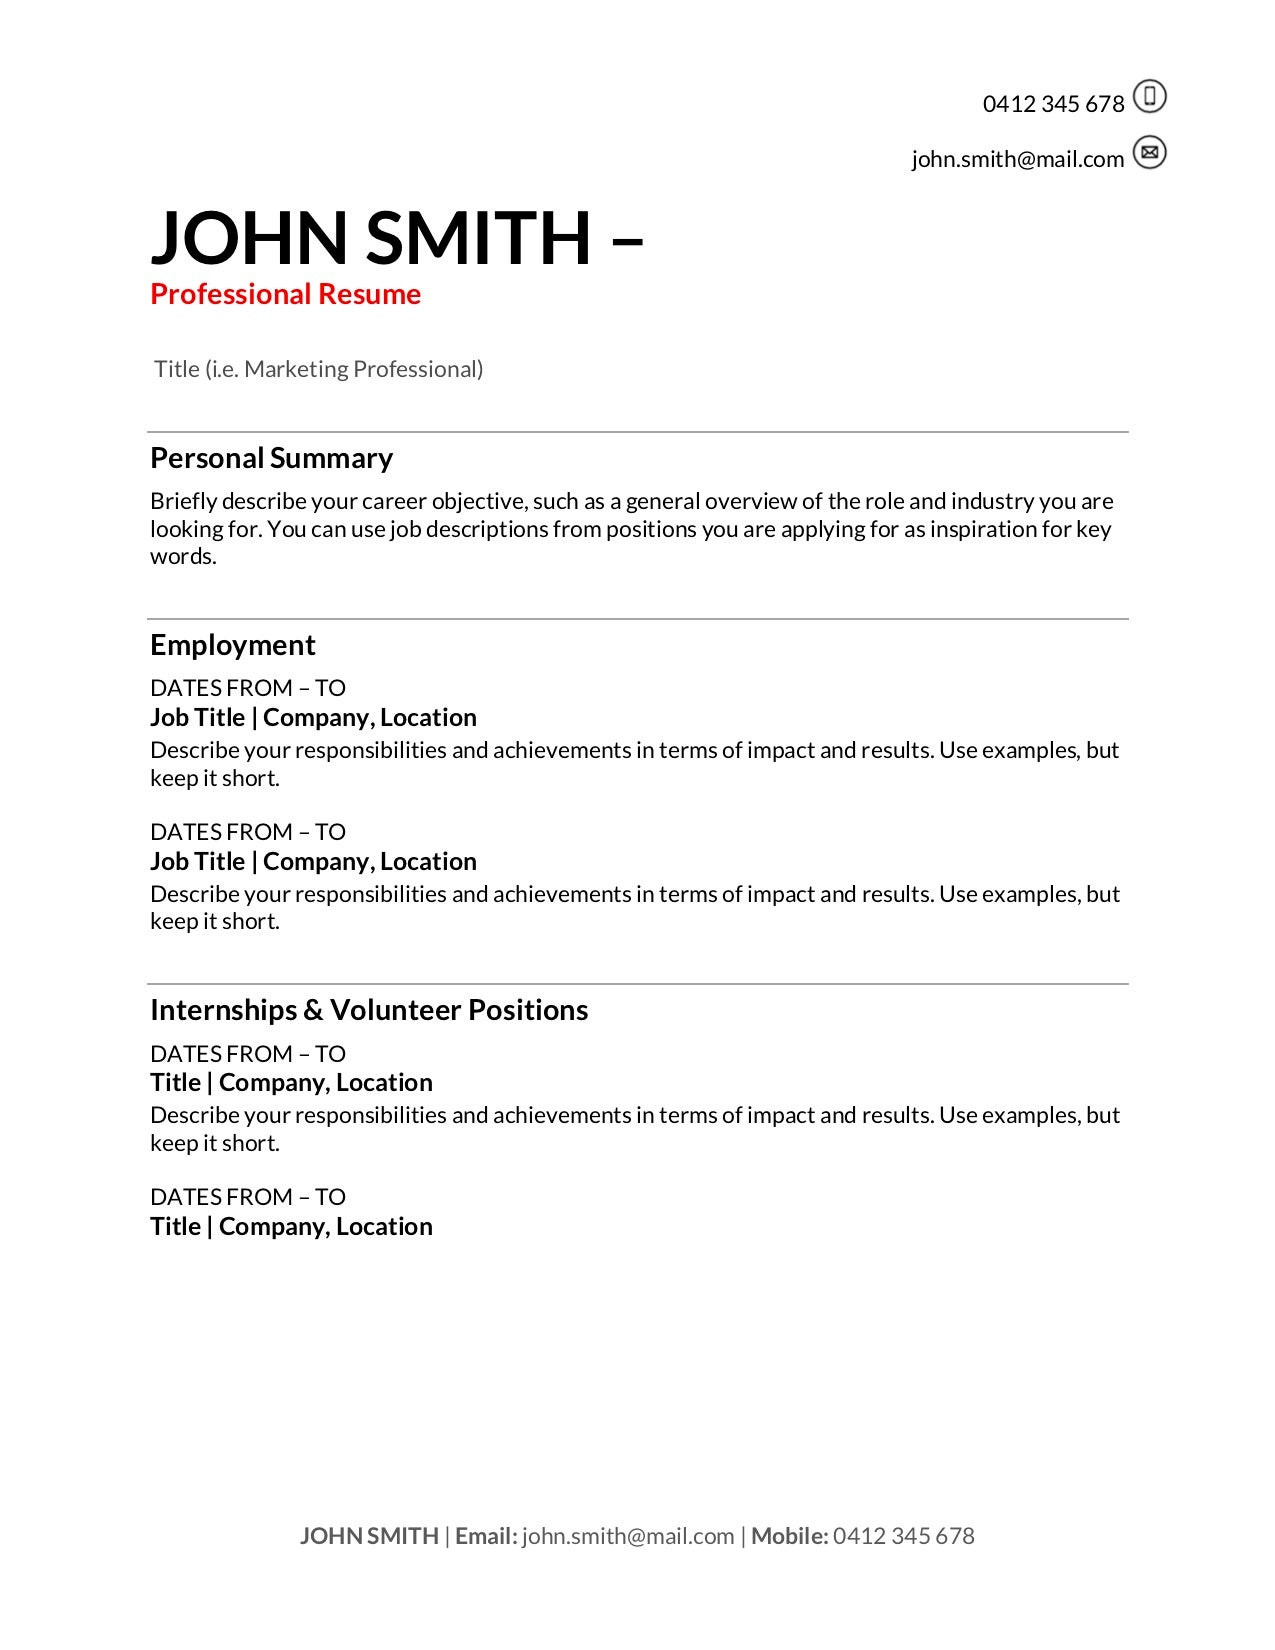 resume examples for any job